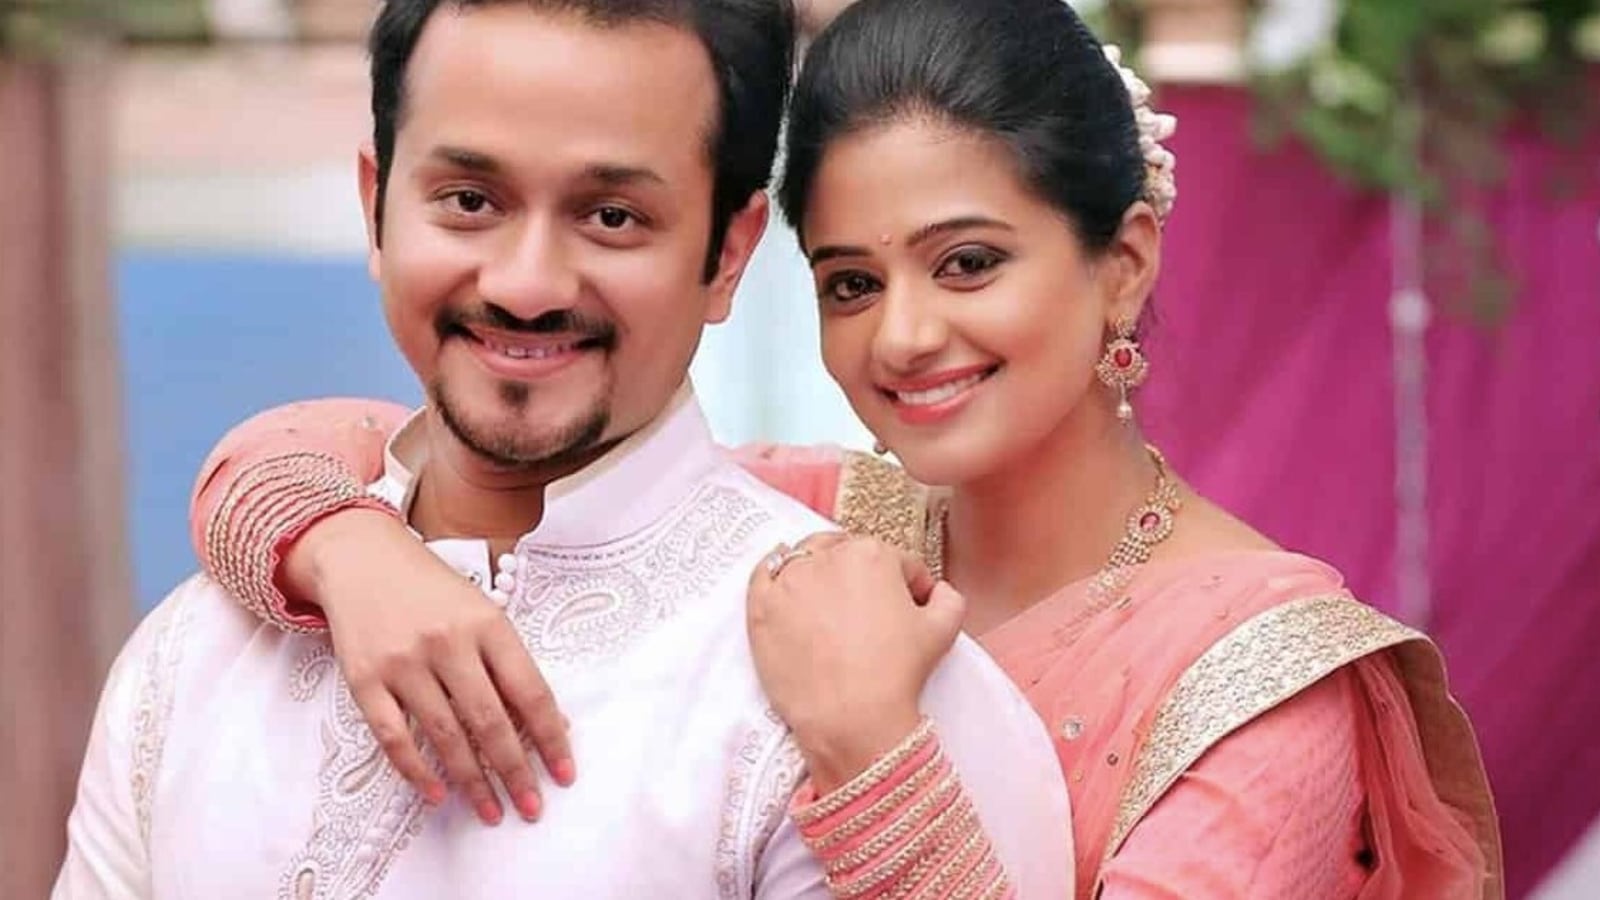 The Family Man's Priyamani says she and husband Mustafa have 'very secure relationship' amid ex-wife's allegations | Bollywood - Hindustan Times